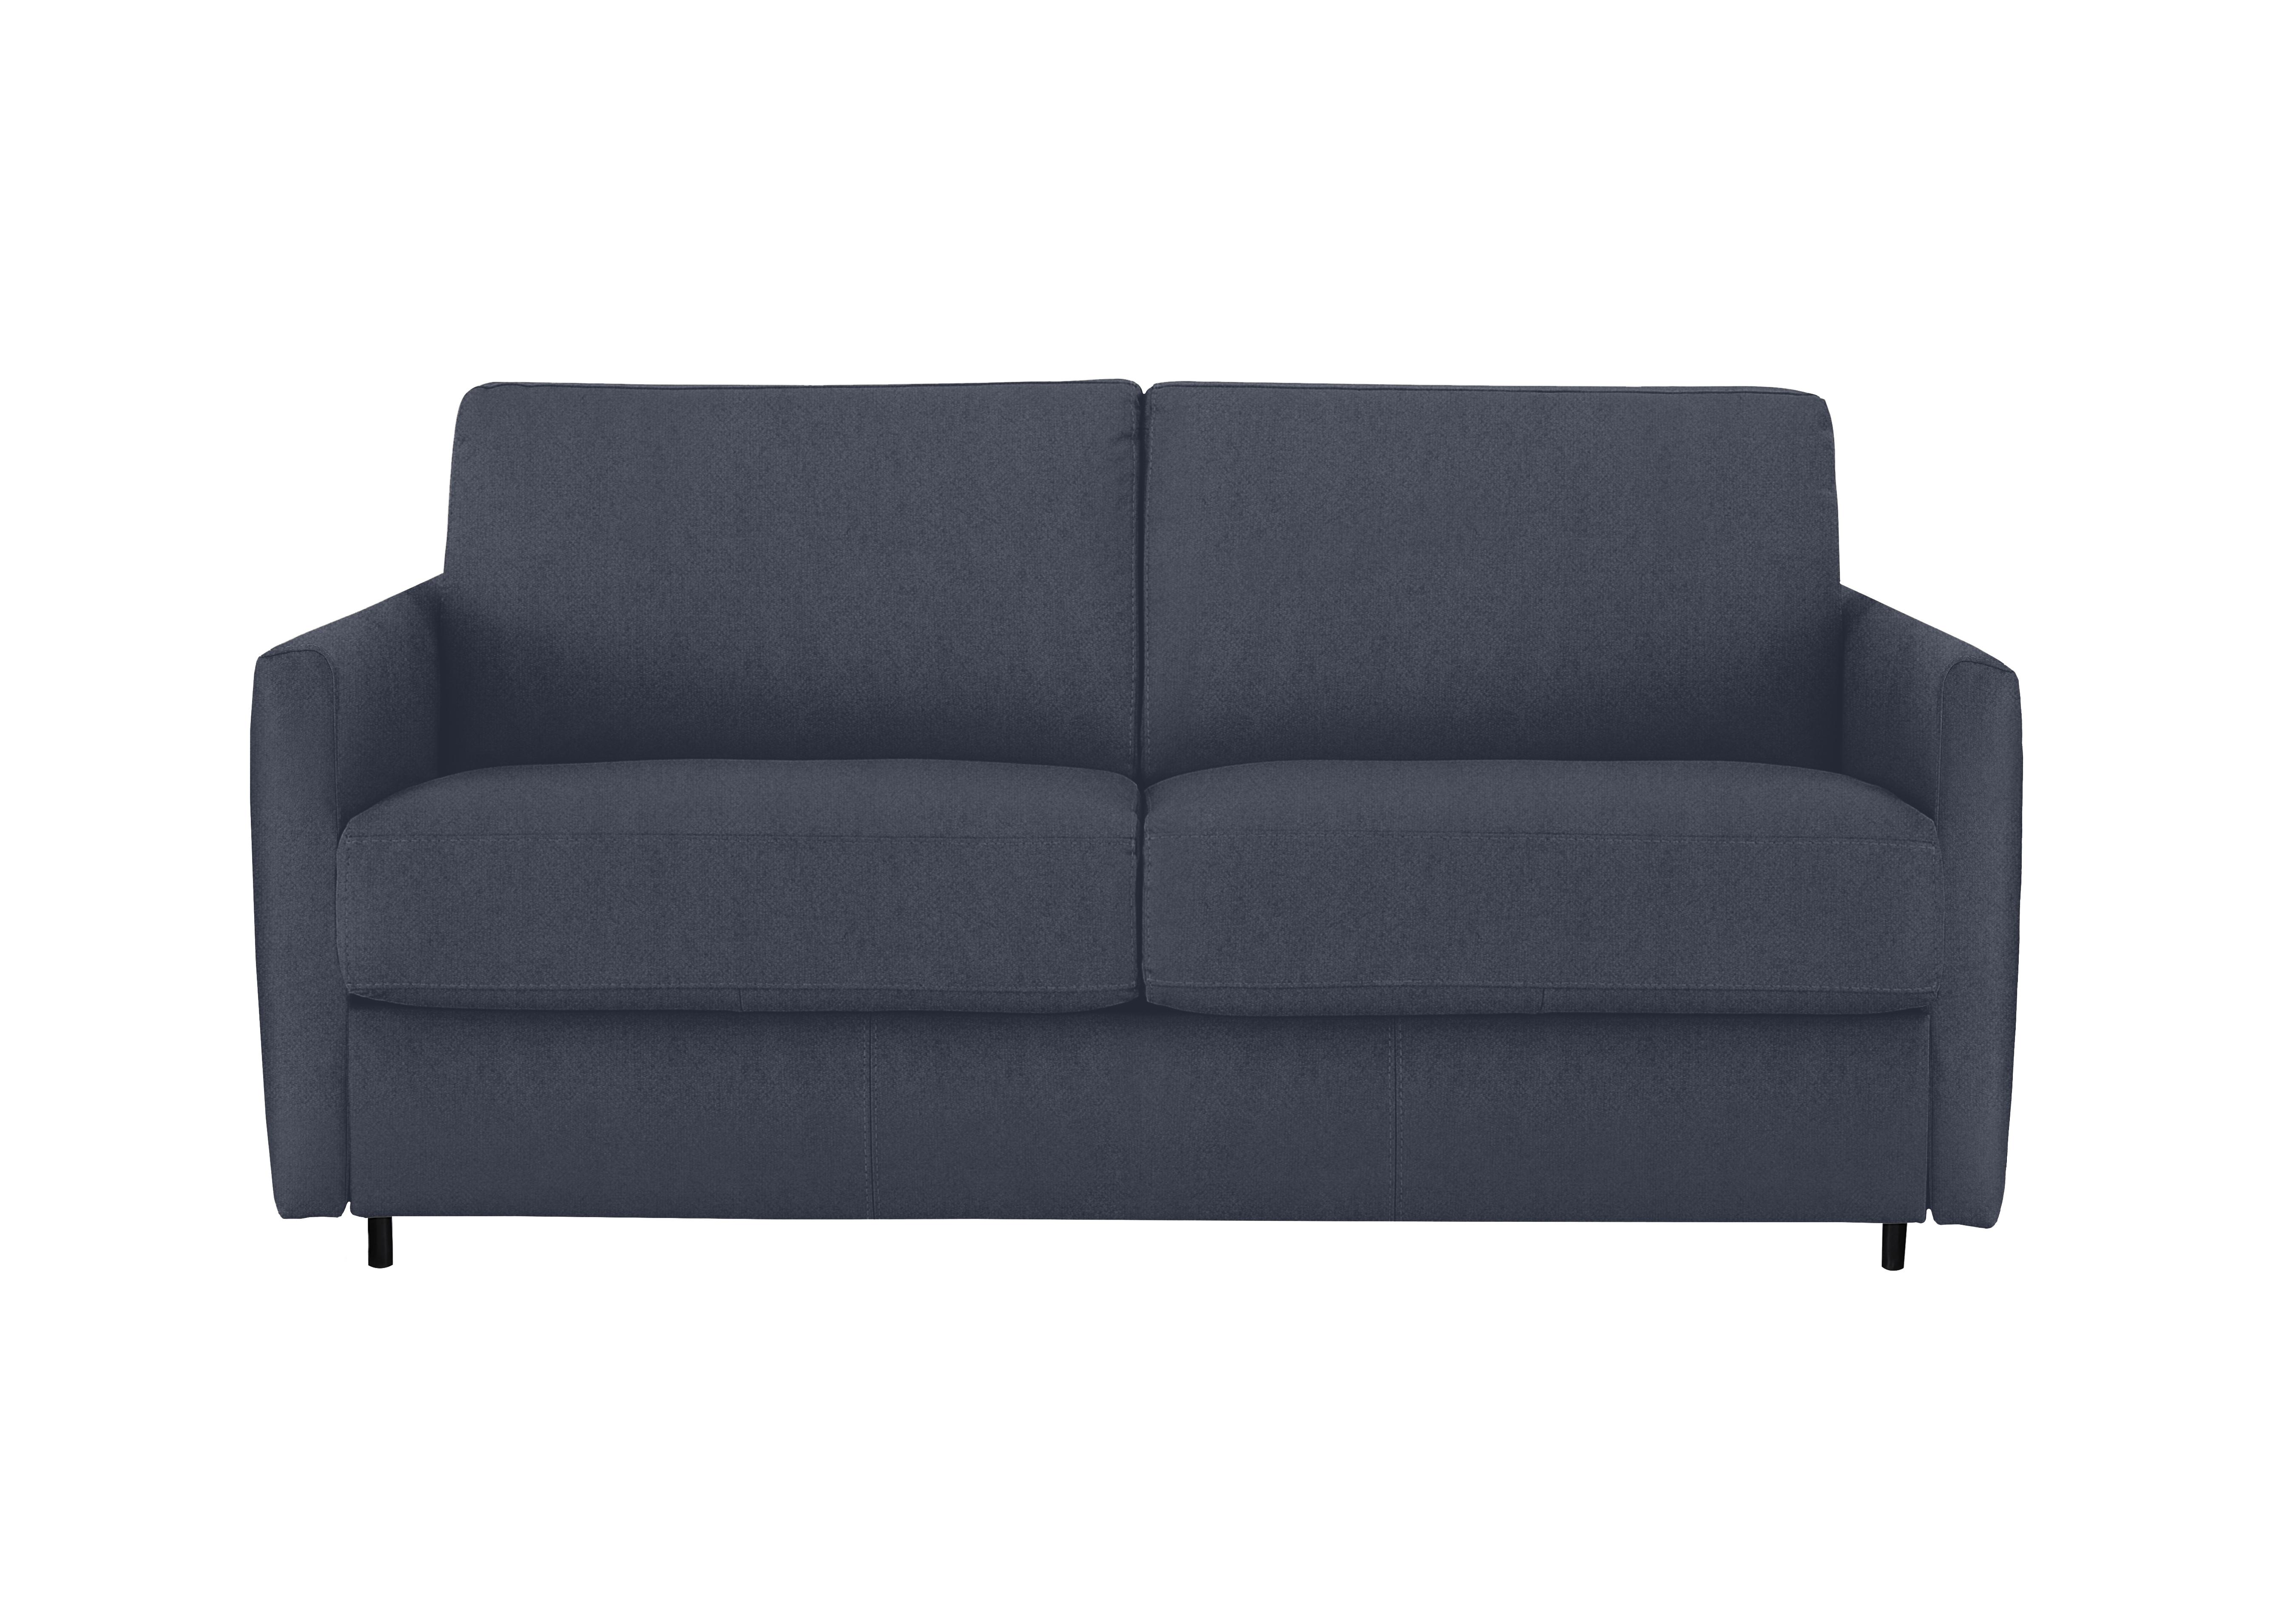 Alcova 2.5 Seater Fabric Sofa Bed with Slim Arms in Fuente Ocean on Furniture Village